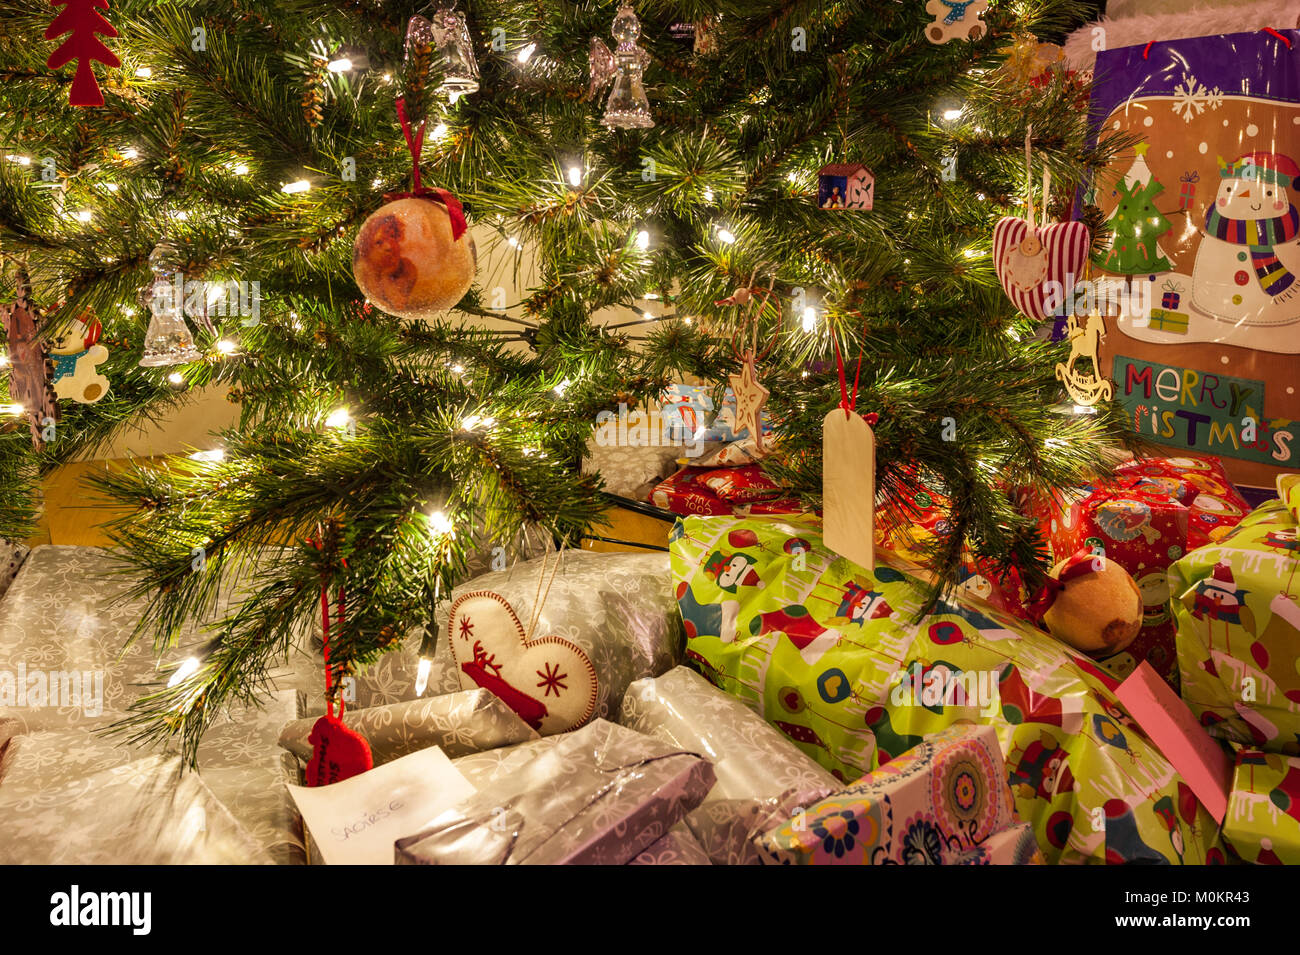 Christmas tree with decorations, lights and Christmas presents. Stock Photo